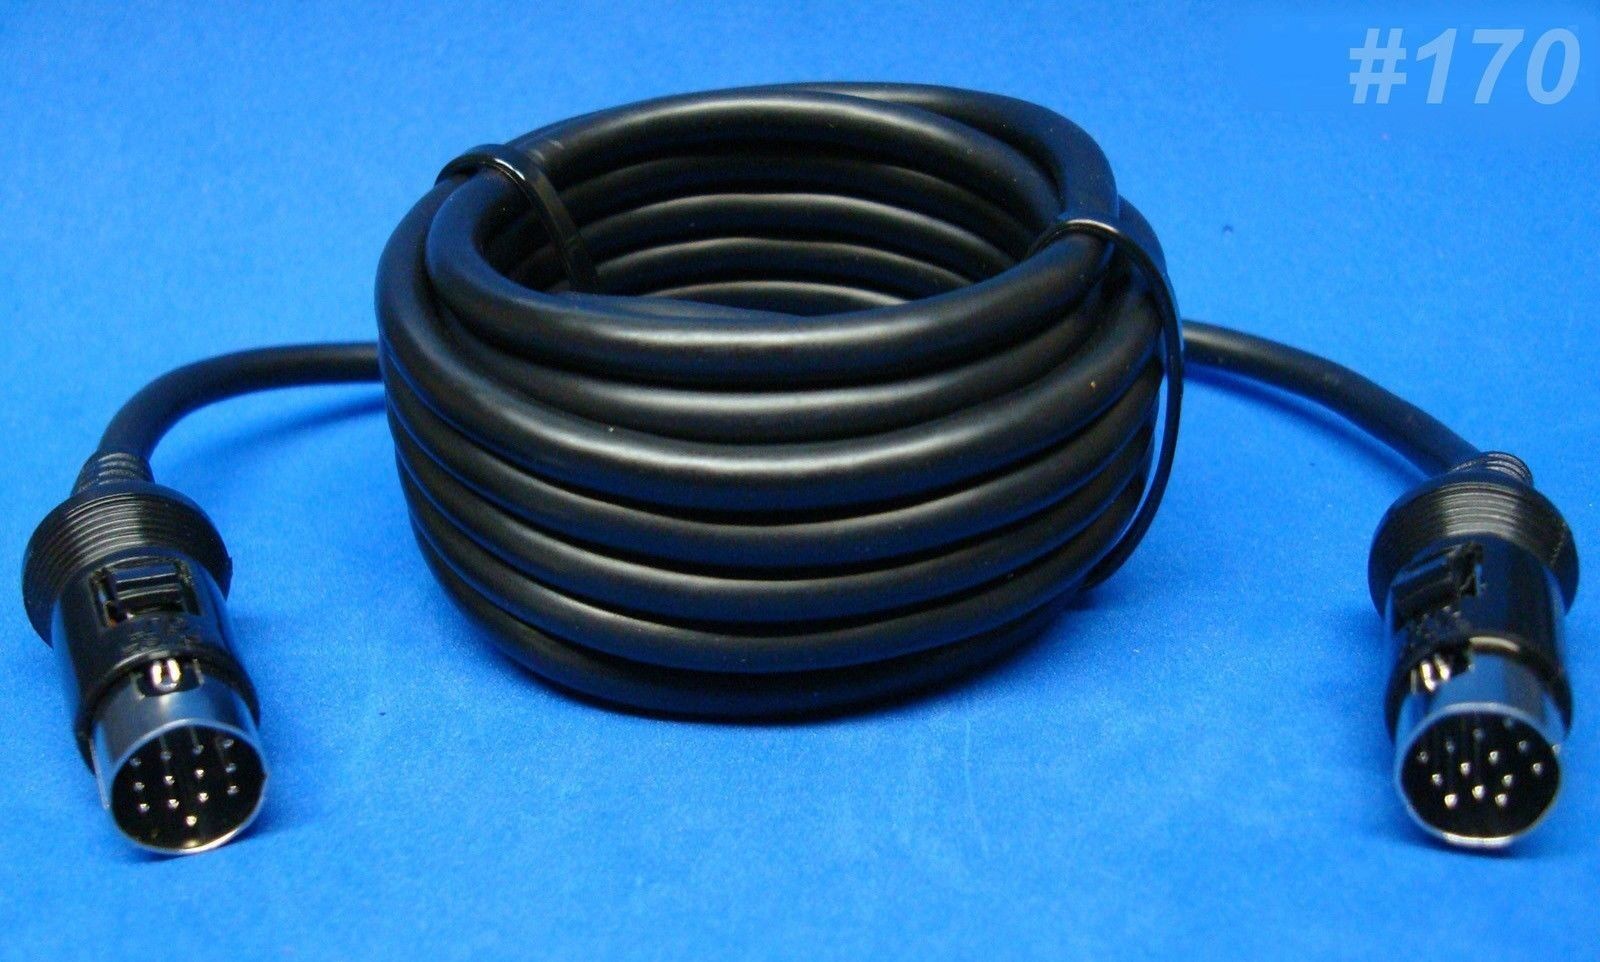 usa seller. LOCKING 13 PIN CABLE SYNTH ROLAND GKC-5 VG-8 GR VG GK 2A MOORE 20-FT